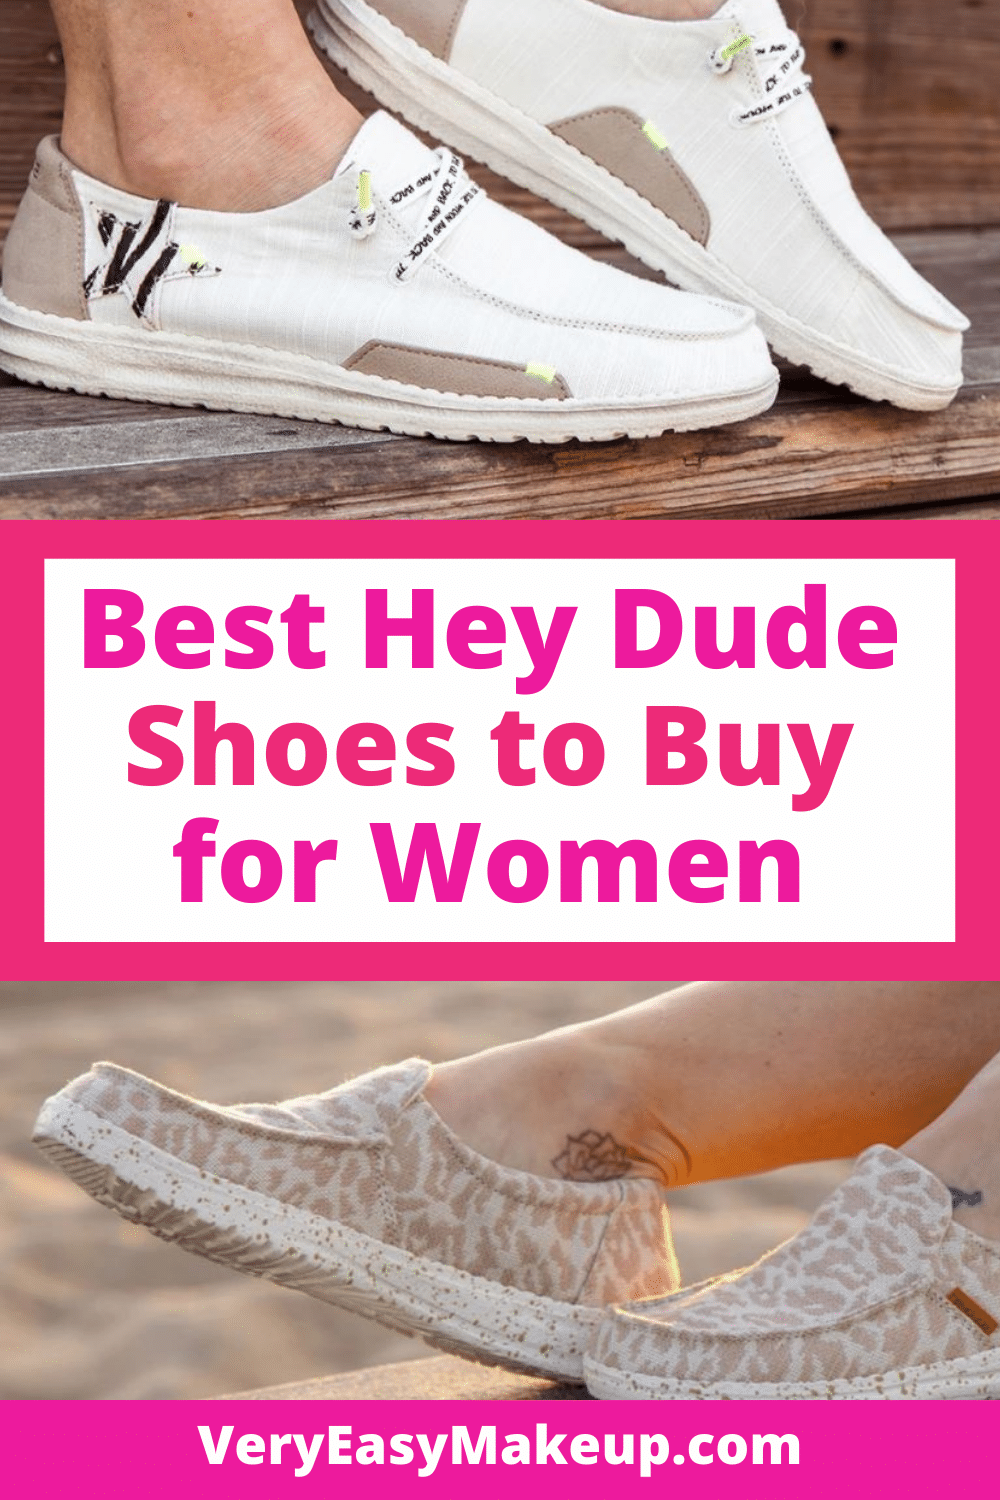 What to wear with hey dude shoes women's